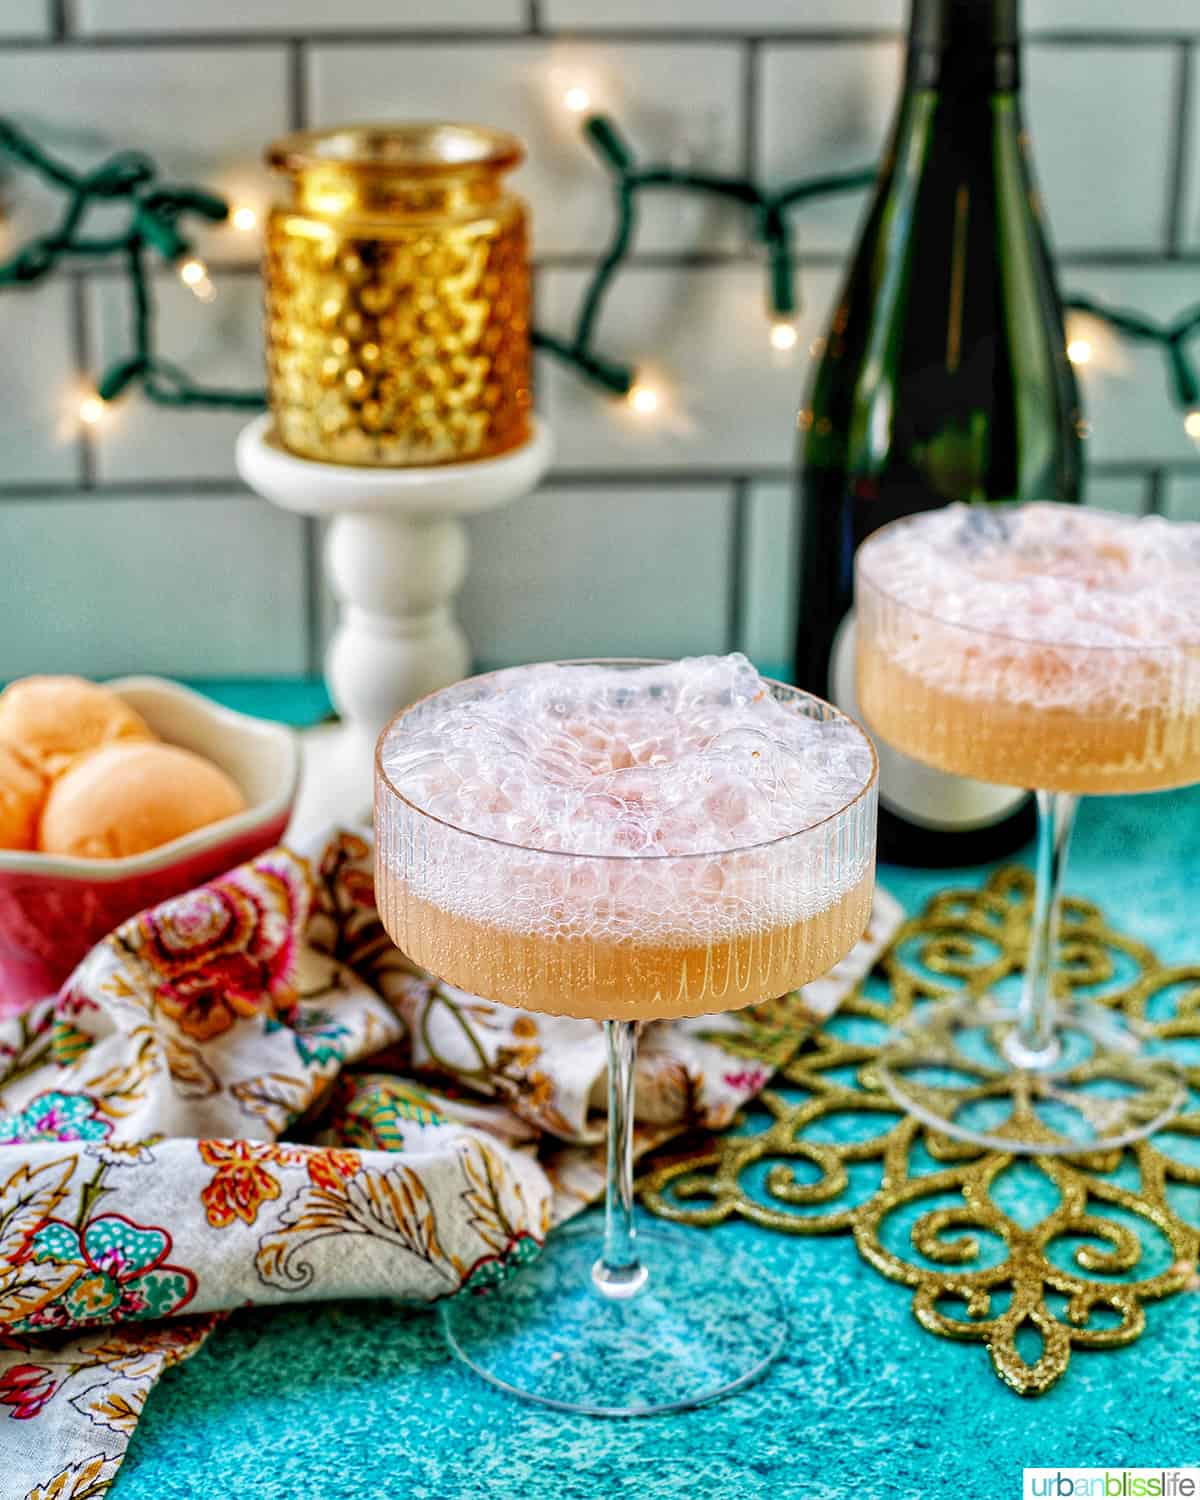 two glasses of champagne sherbet floats with twinkling lights and Champagne bottle in background and colorful decor.